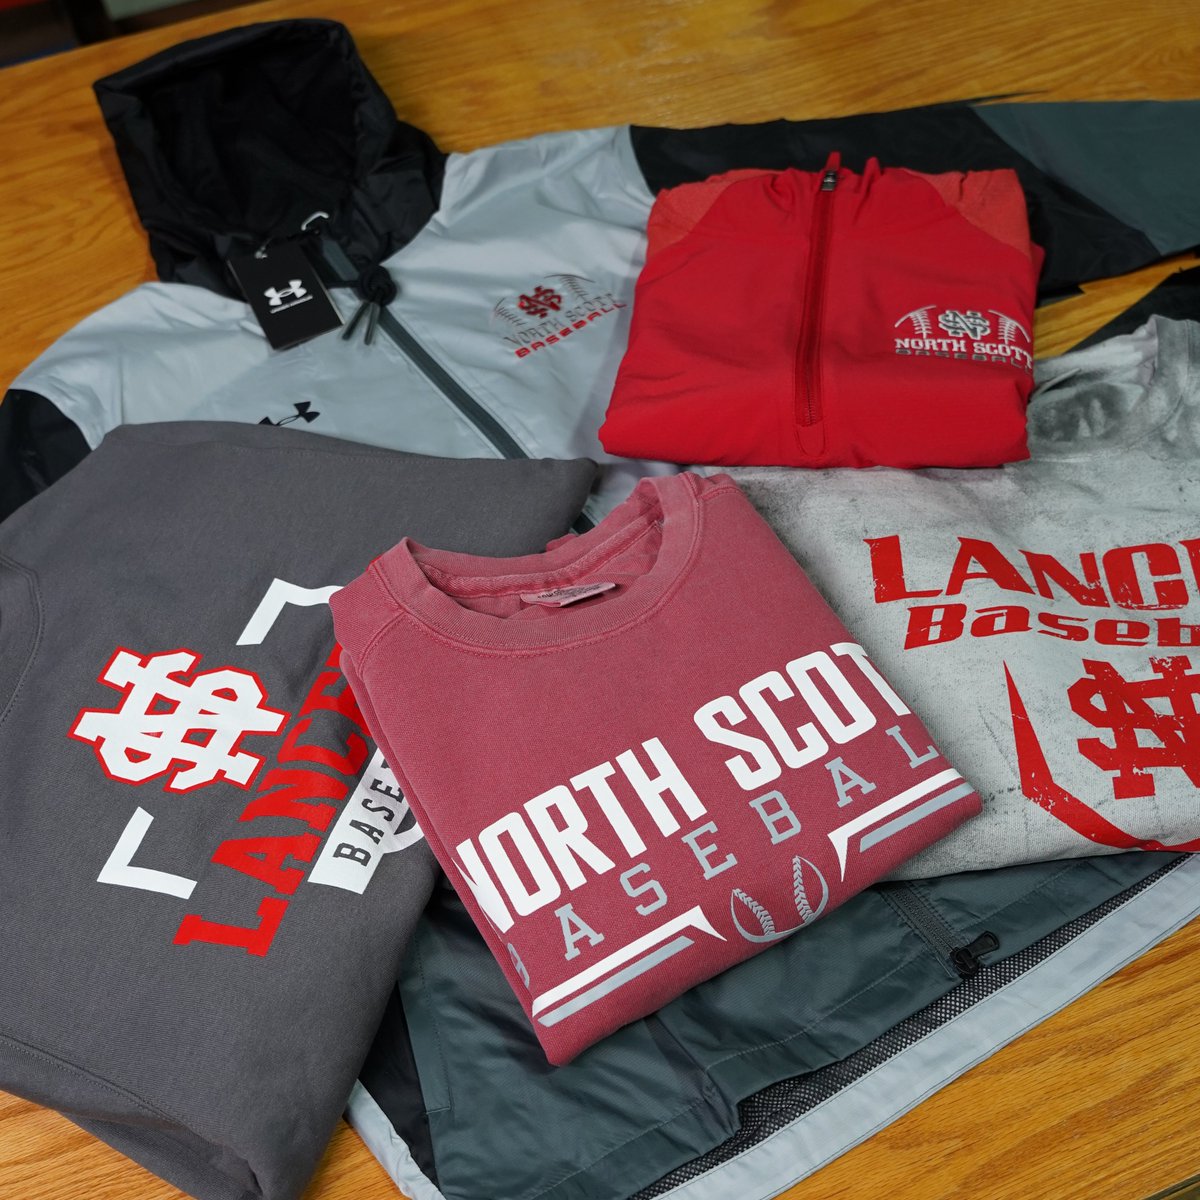 Check out a couple items from the North Scott baseball spring apparel web store! ⚾ @N_S_Baseball #AdcraftWebStores